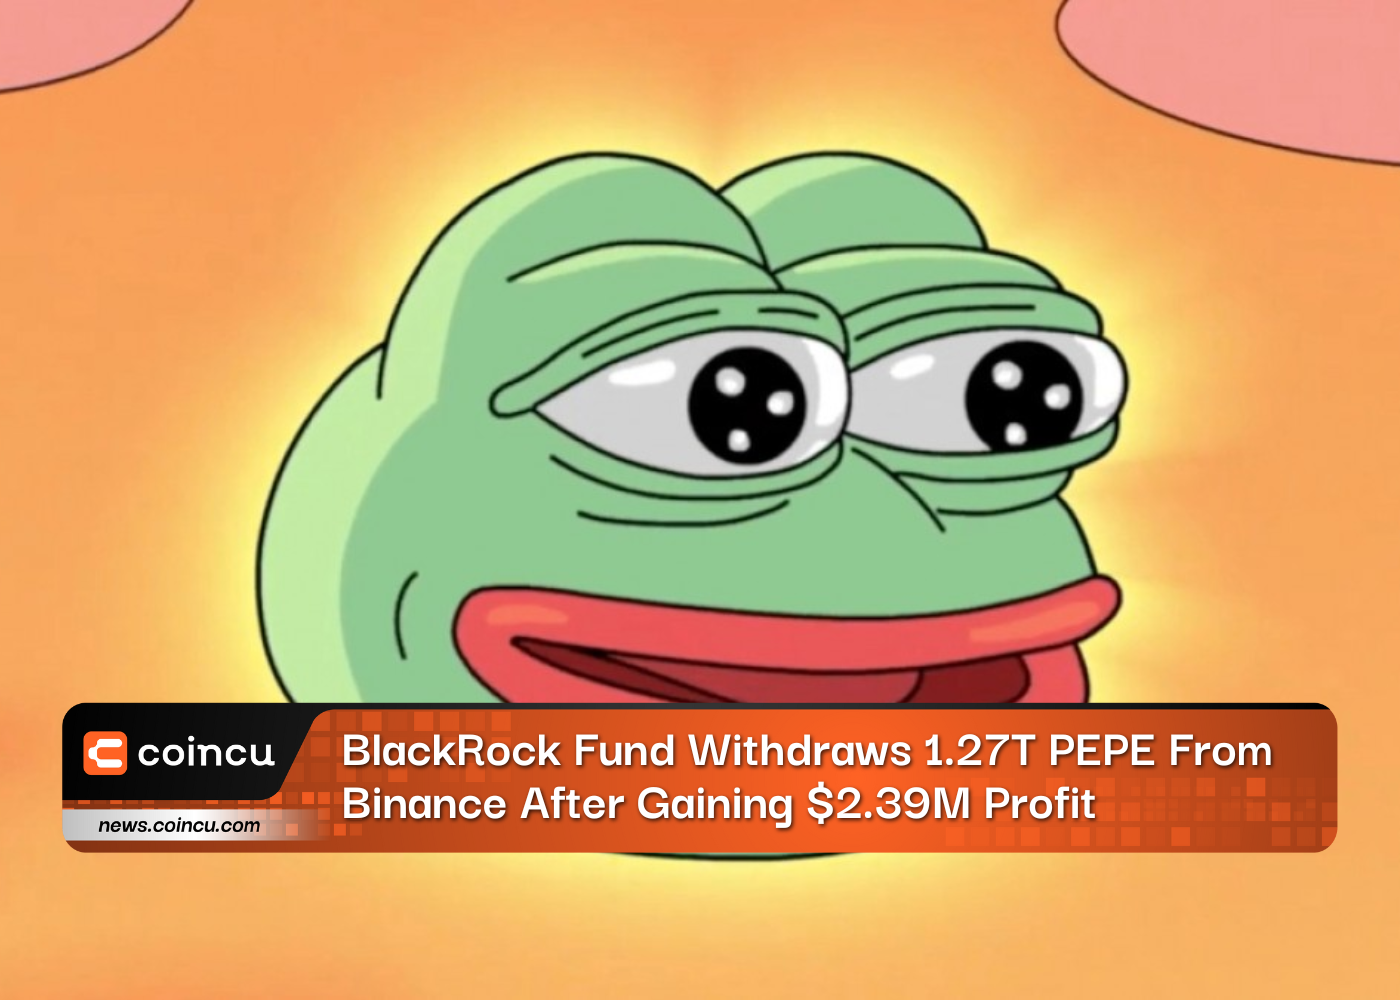 BlackRock Fund Withdraws 1.27T PEPE From Binance After Gaining $2.39M Profit